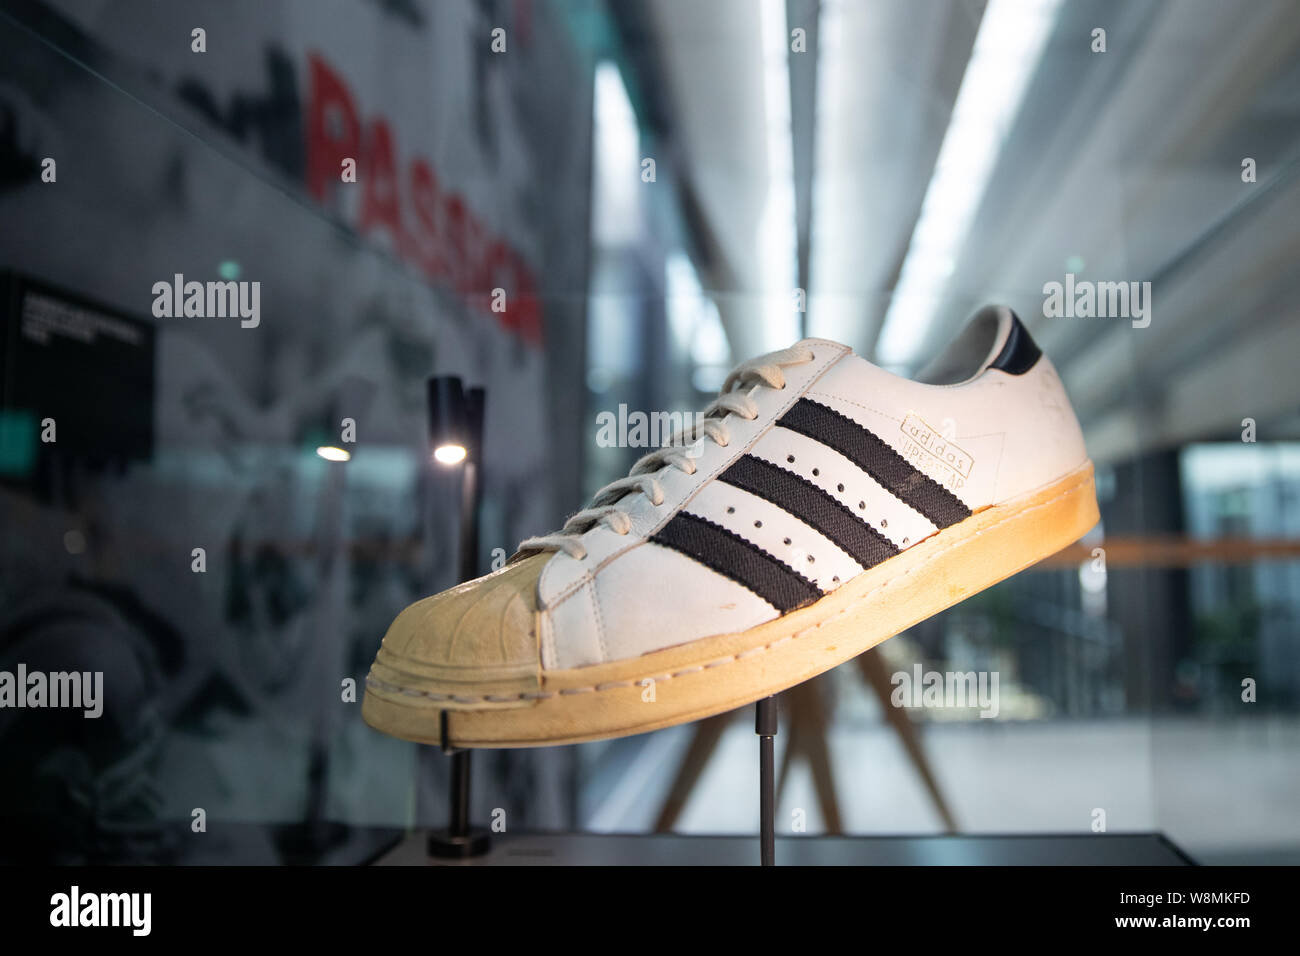 Adidas Superstar High Resolution Stock Photography and Images - Alamy